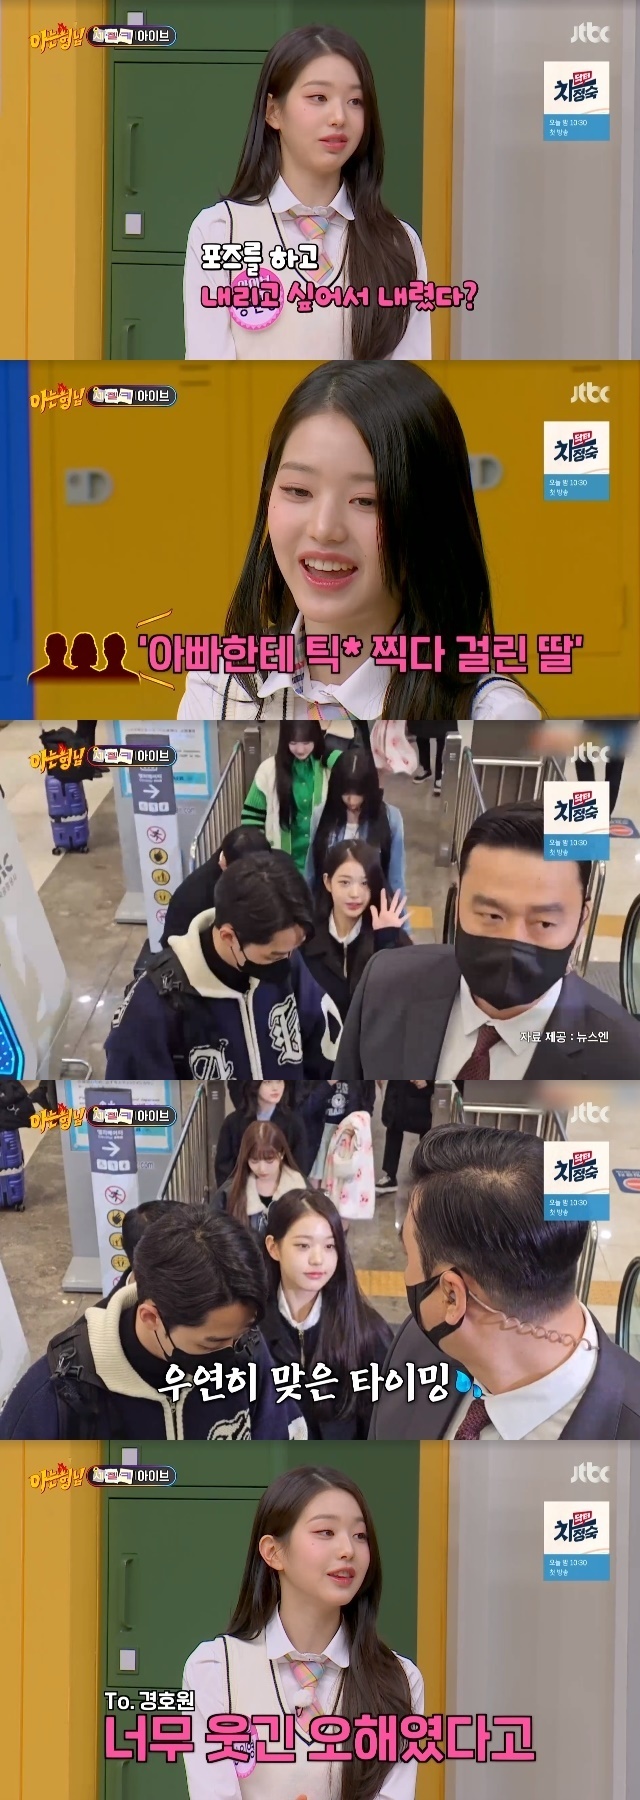 Jean Long-distance swimming explained the bodyguards notice.In the 379th JTBC entertainment show Knowing Bros (hereinafter referred to as Knowing Bros), which aired on April 15, Eugene, Autumn, Lay, Jean Long-distance swimming, Liz, and Lee Seo of the group IVE appeared as guests.Long-distance swimming on the day, Kang Ho-dong said, Long-distance swimming has noticed Bodyguard.